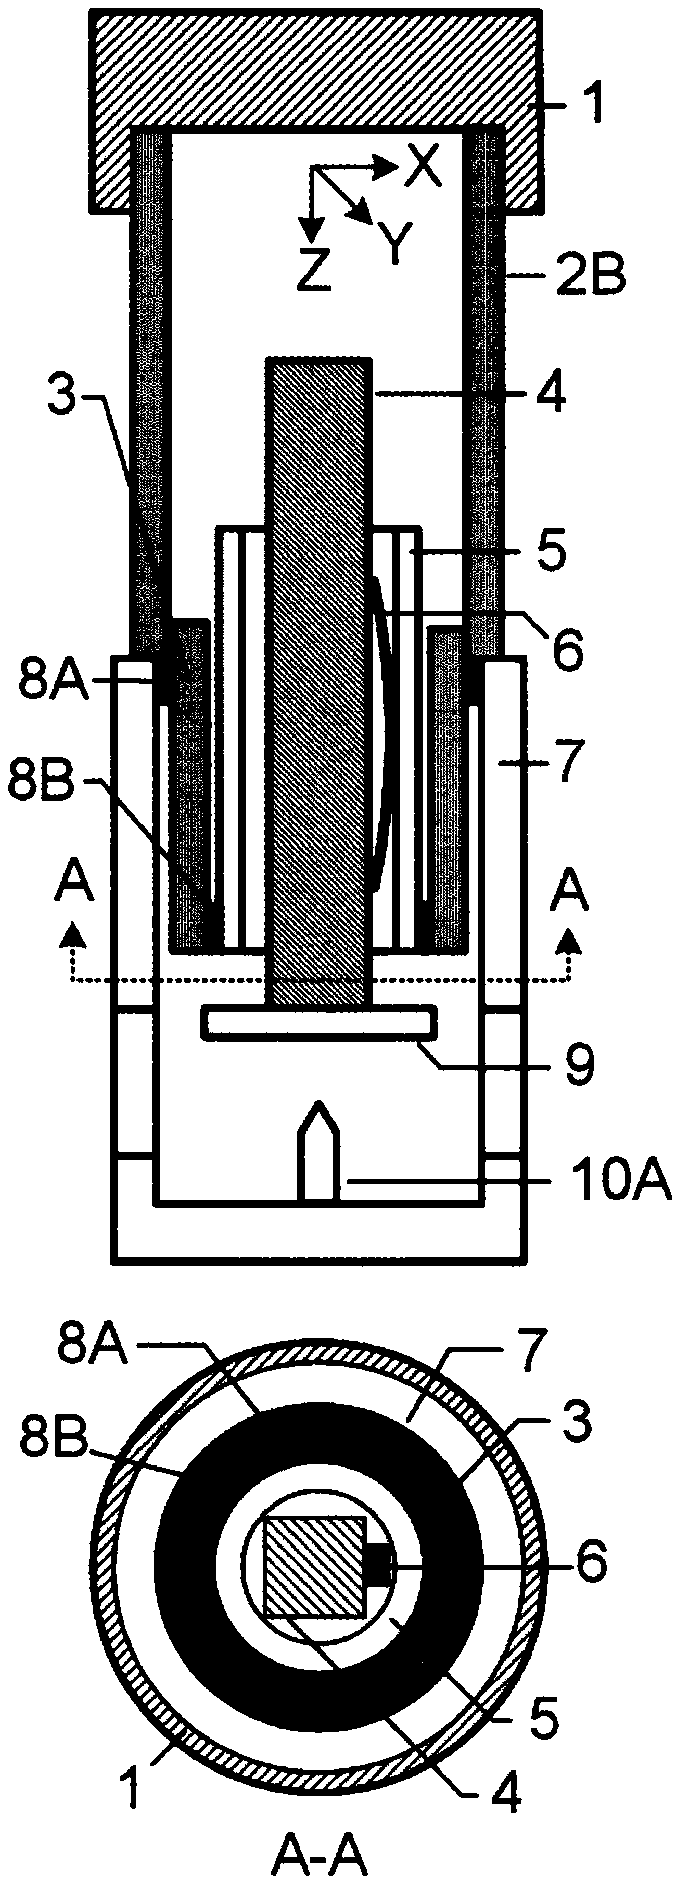 Tube-type approximation and imaging unit mechanical tandem type scanning tunneling microscope body